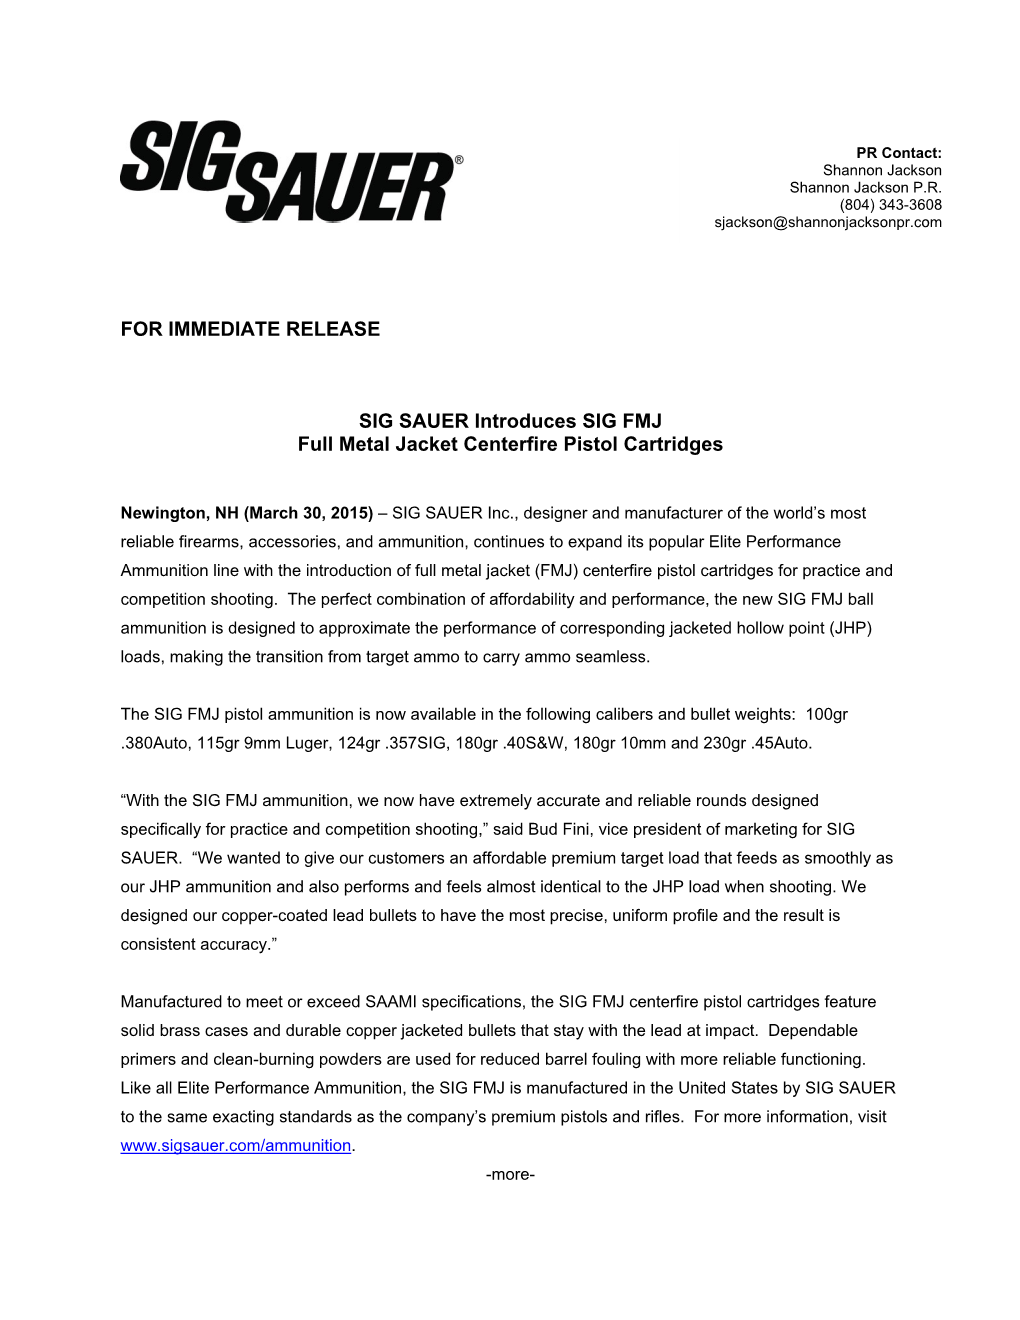 FOR IMMEDIATE RELEASE SIG SAUER Introduces SIG FMJ Full